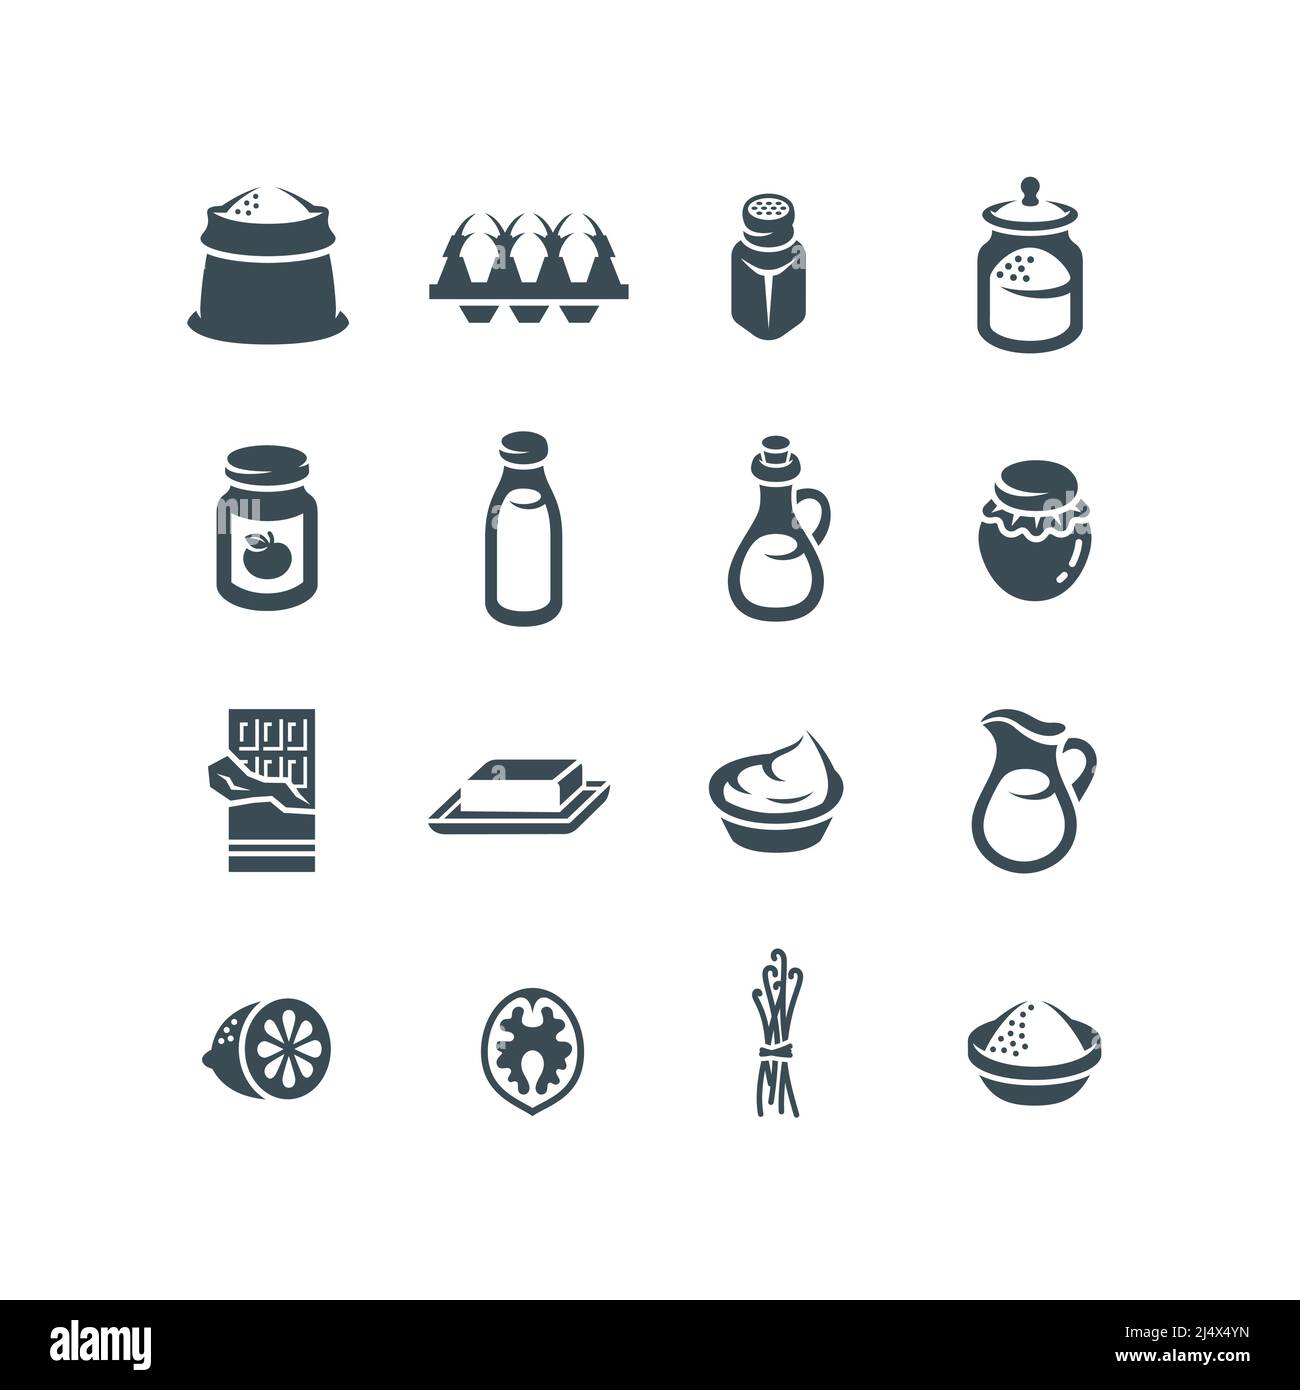 Baking ingredients pictograms. Products for preparing homemade pastry. Simple flat monochrome icons of flour, salt, sugar, milk, butter, oil, eggs, ja Stock Vector